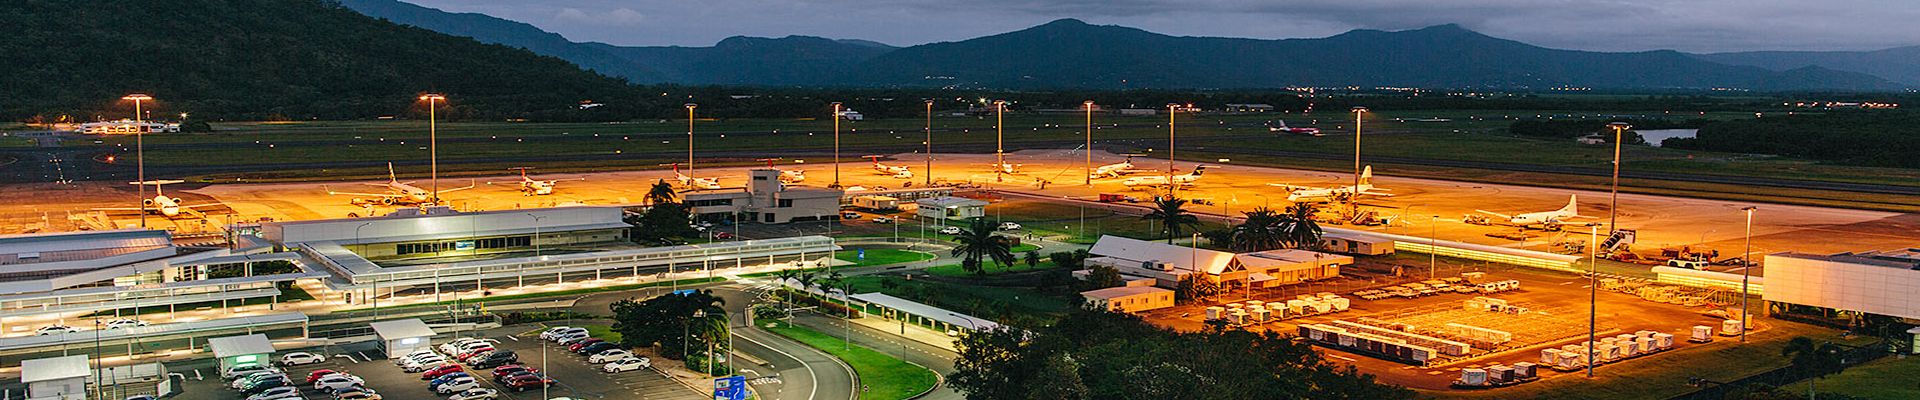 how to get from cairns airport to palm cove